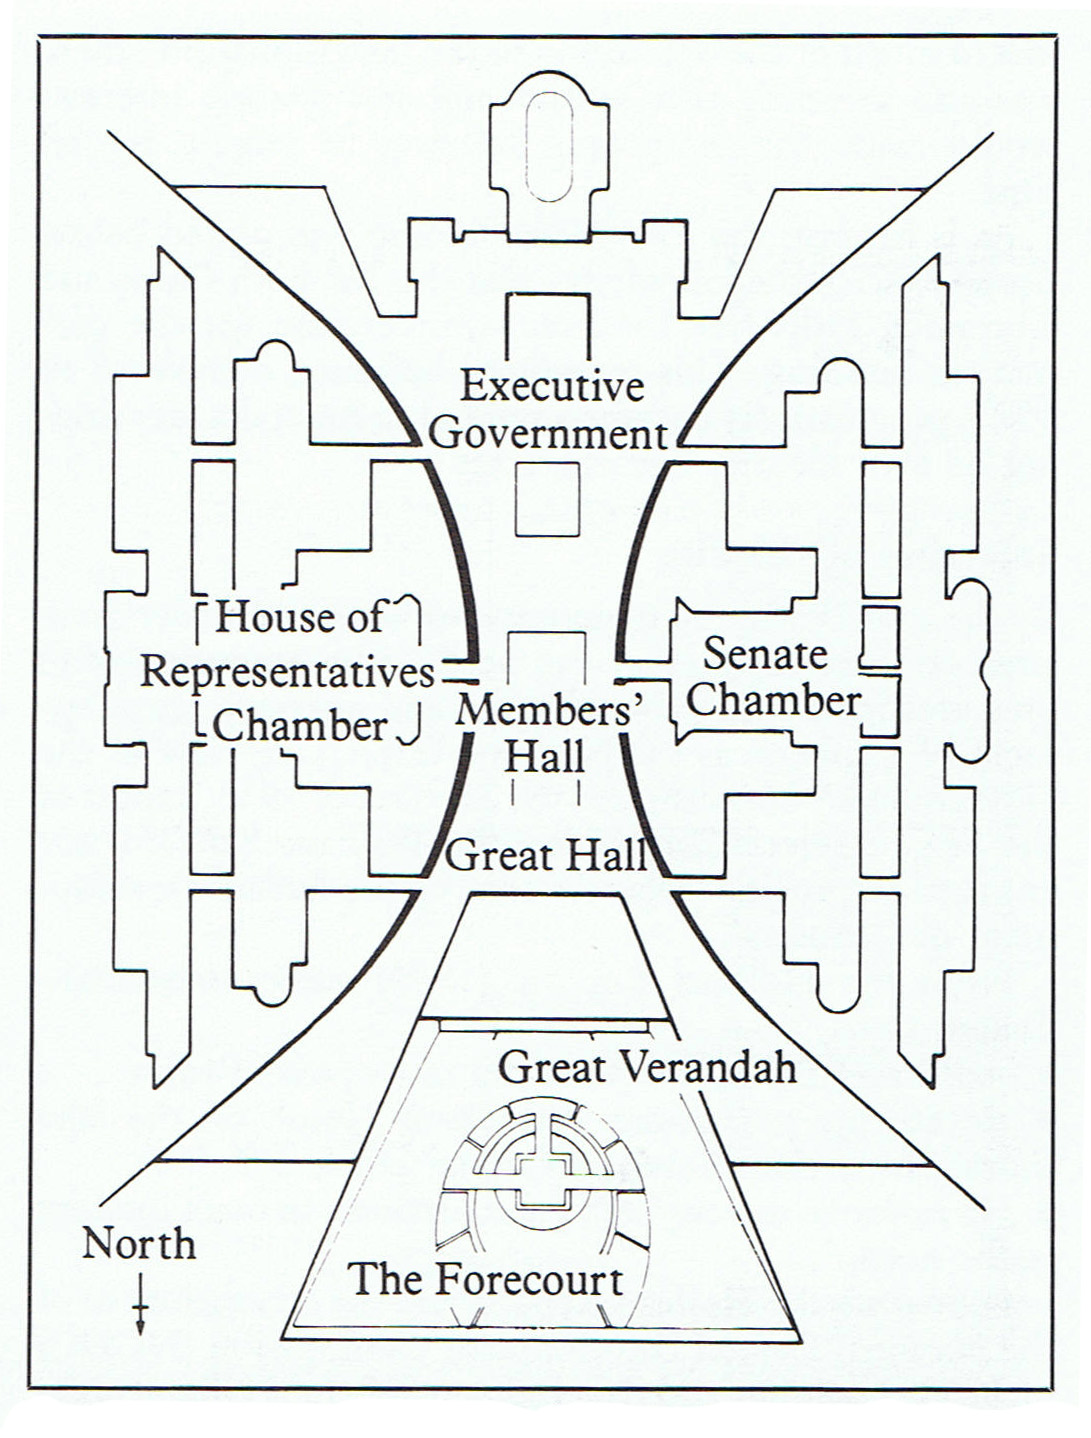 Layout of the main elements